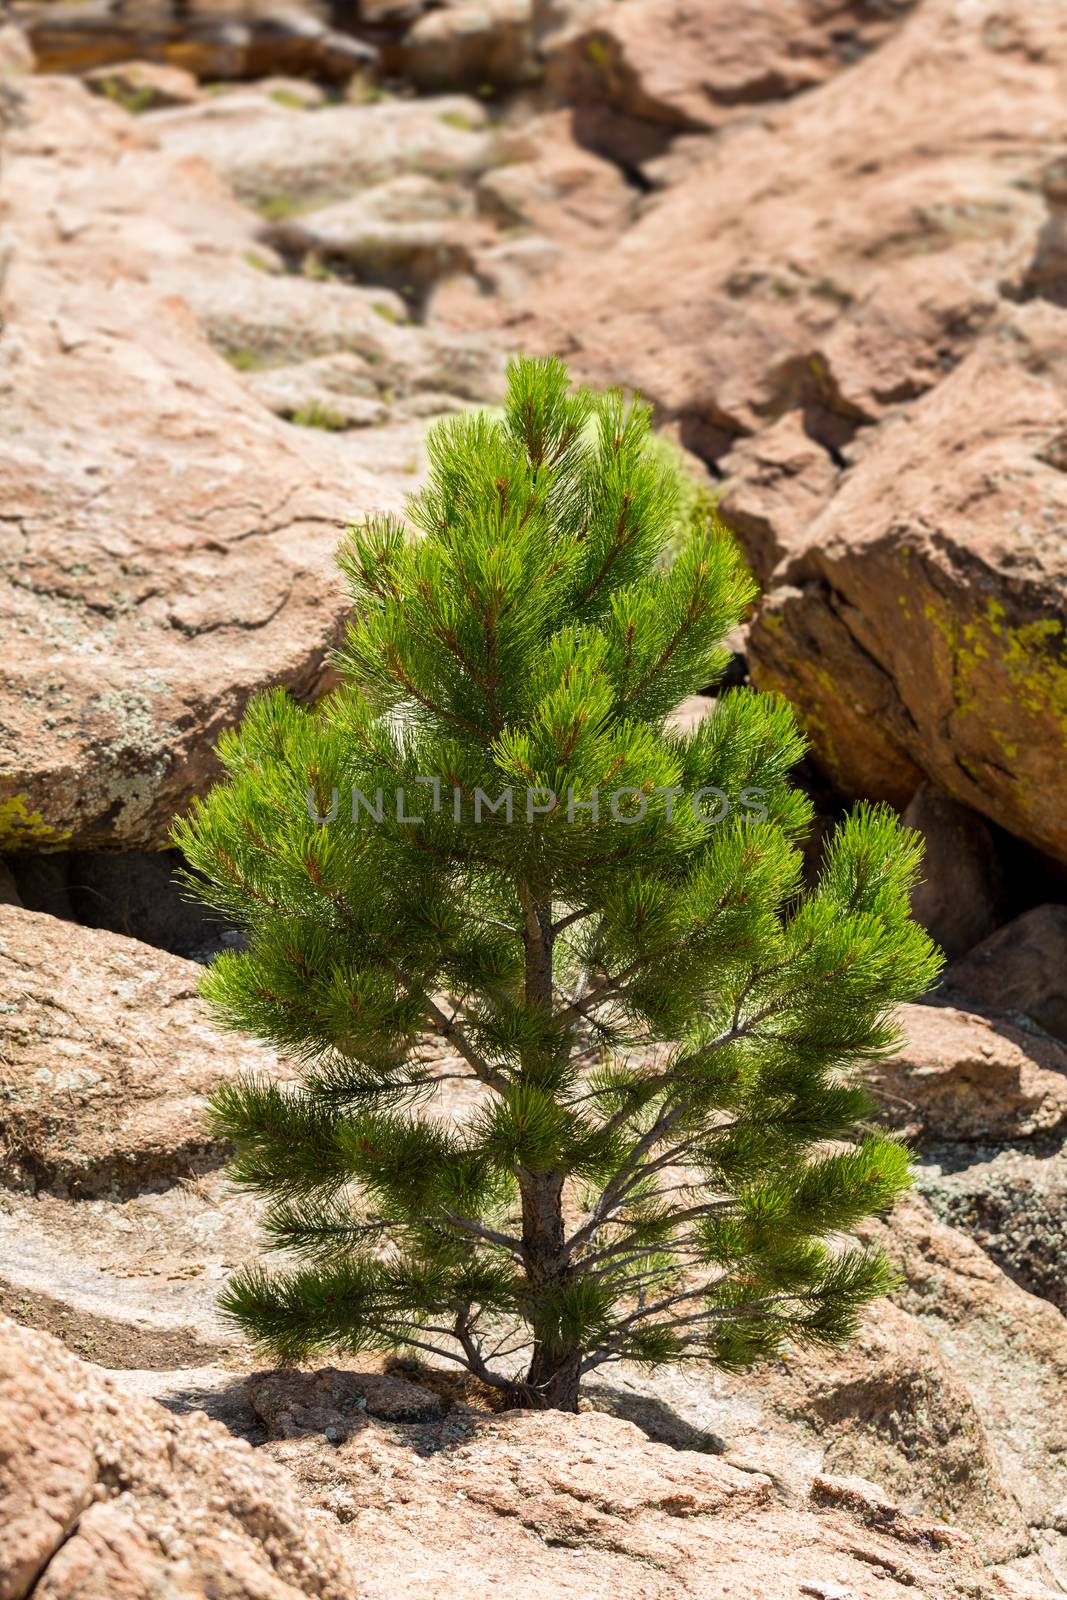 Small young ponderosa pine tree grows from rocky plateau by Turtle Rocks near Buena Vista Colorado, famous for climbing